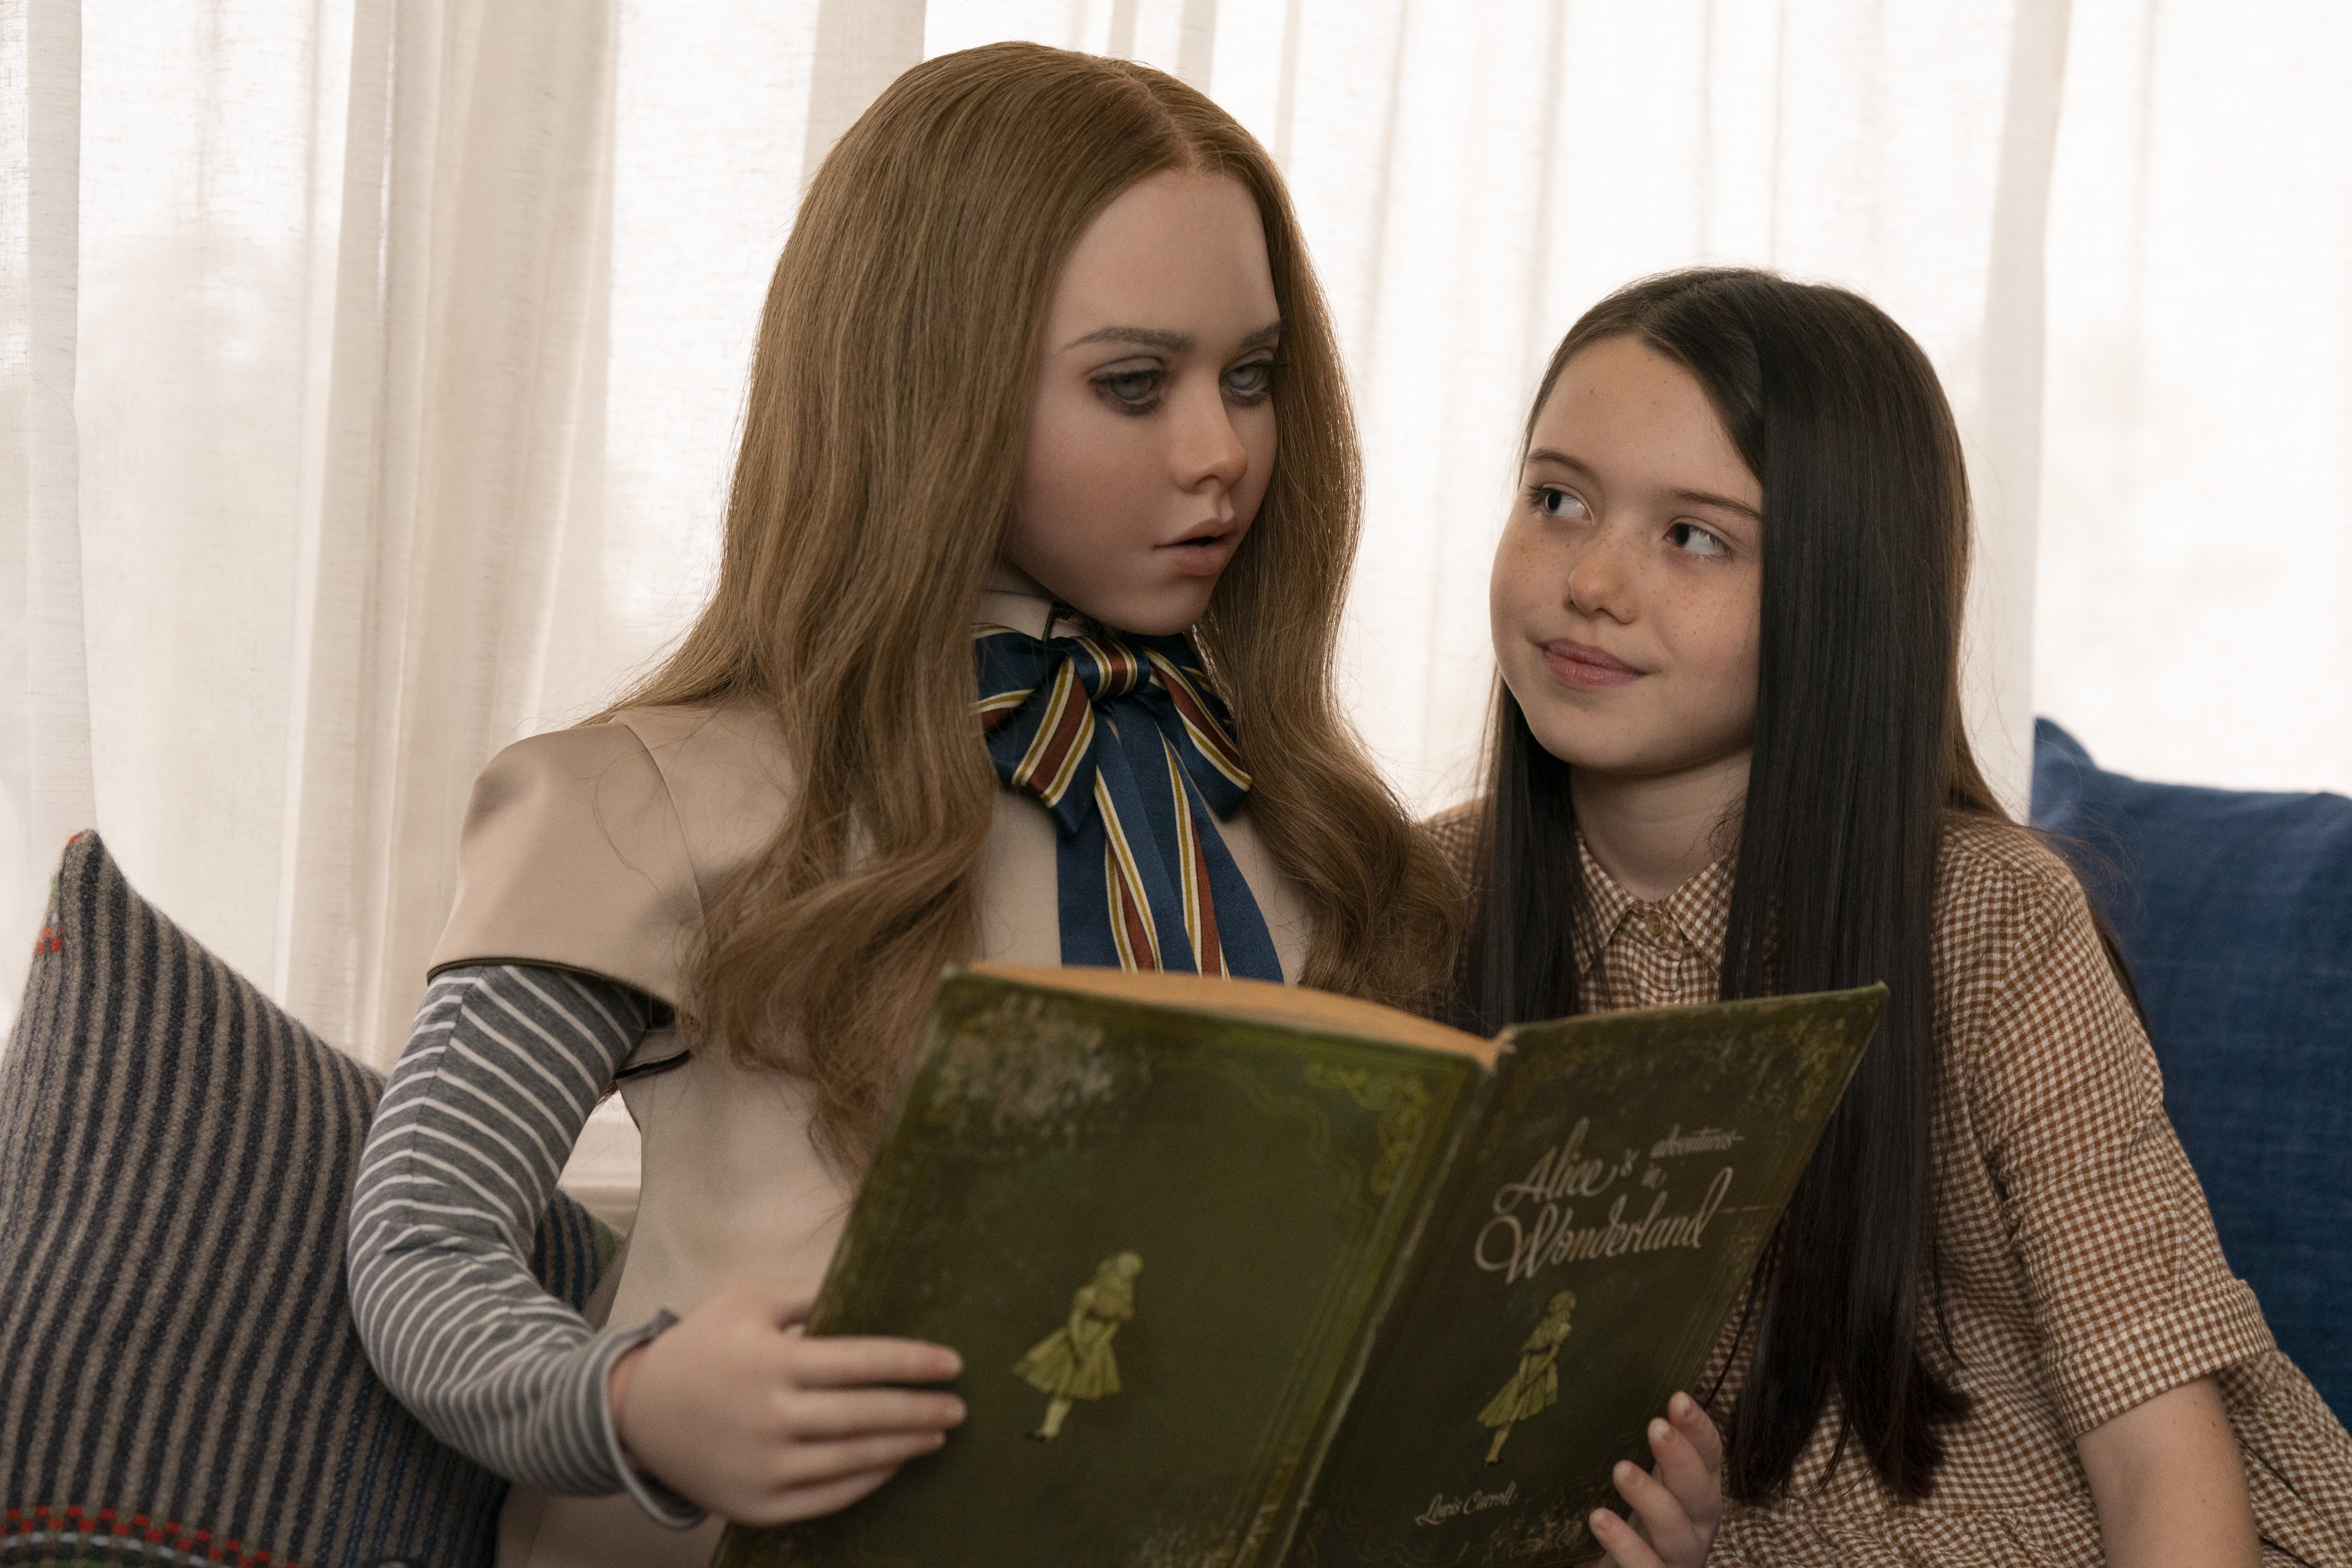 A dead-eyed American Girl-looking robot doll reads an old copy of Alice in Wonderland to a similarly dressed young girl as she looks on fondly